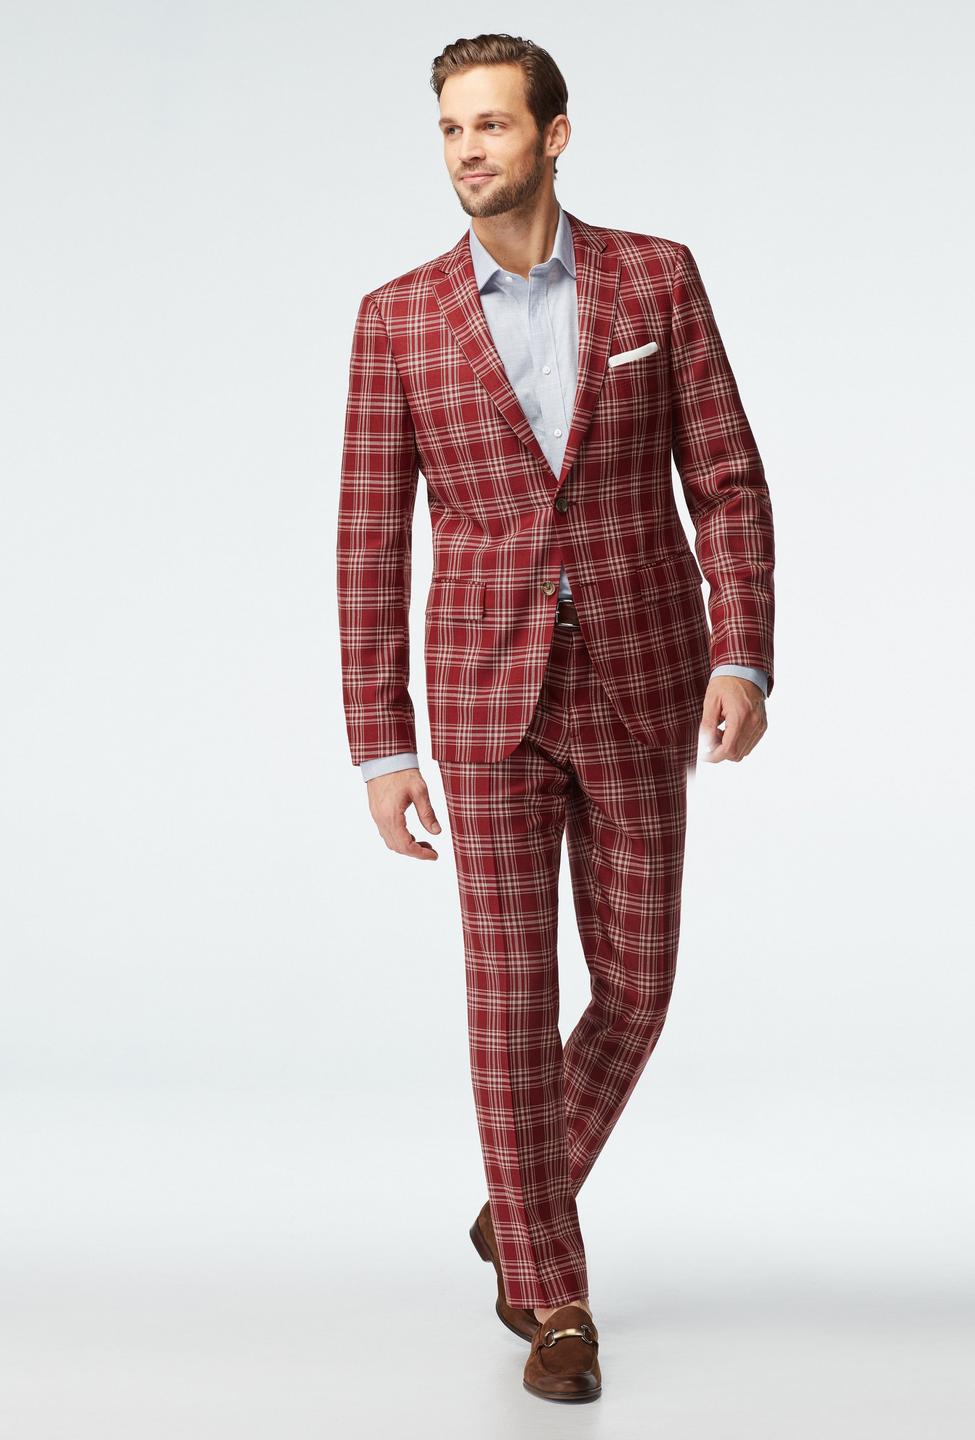 Red suit - Stone Plaid Design from Seasonal Indochino Collection